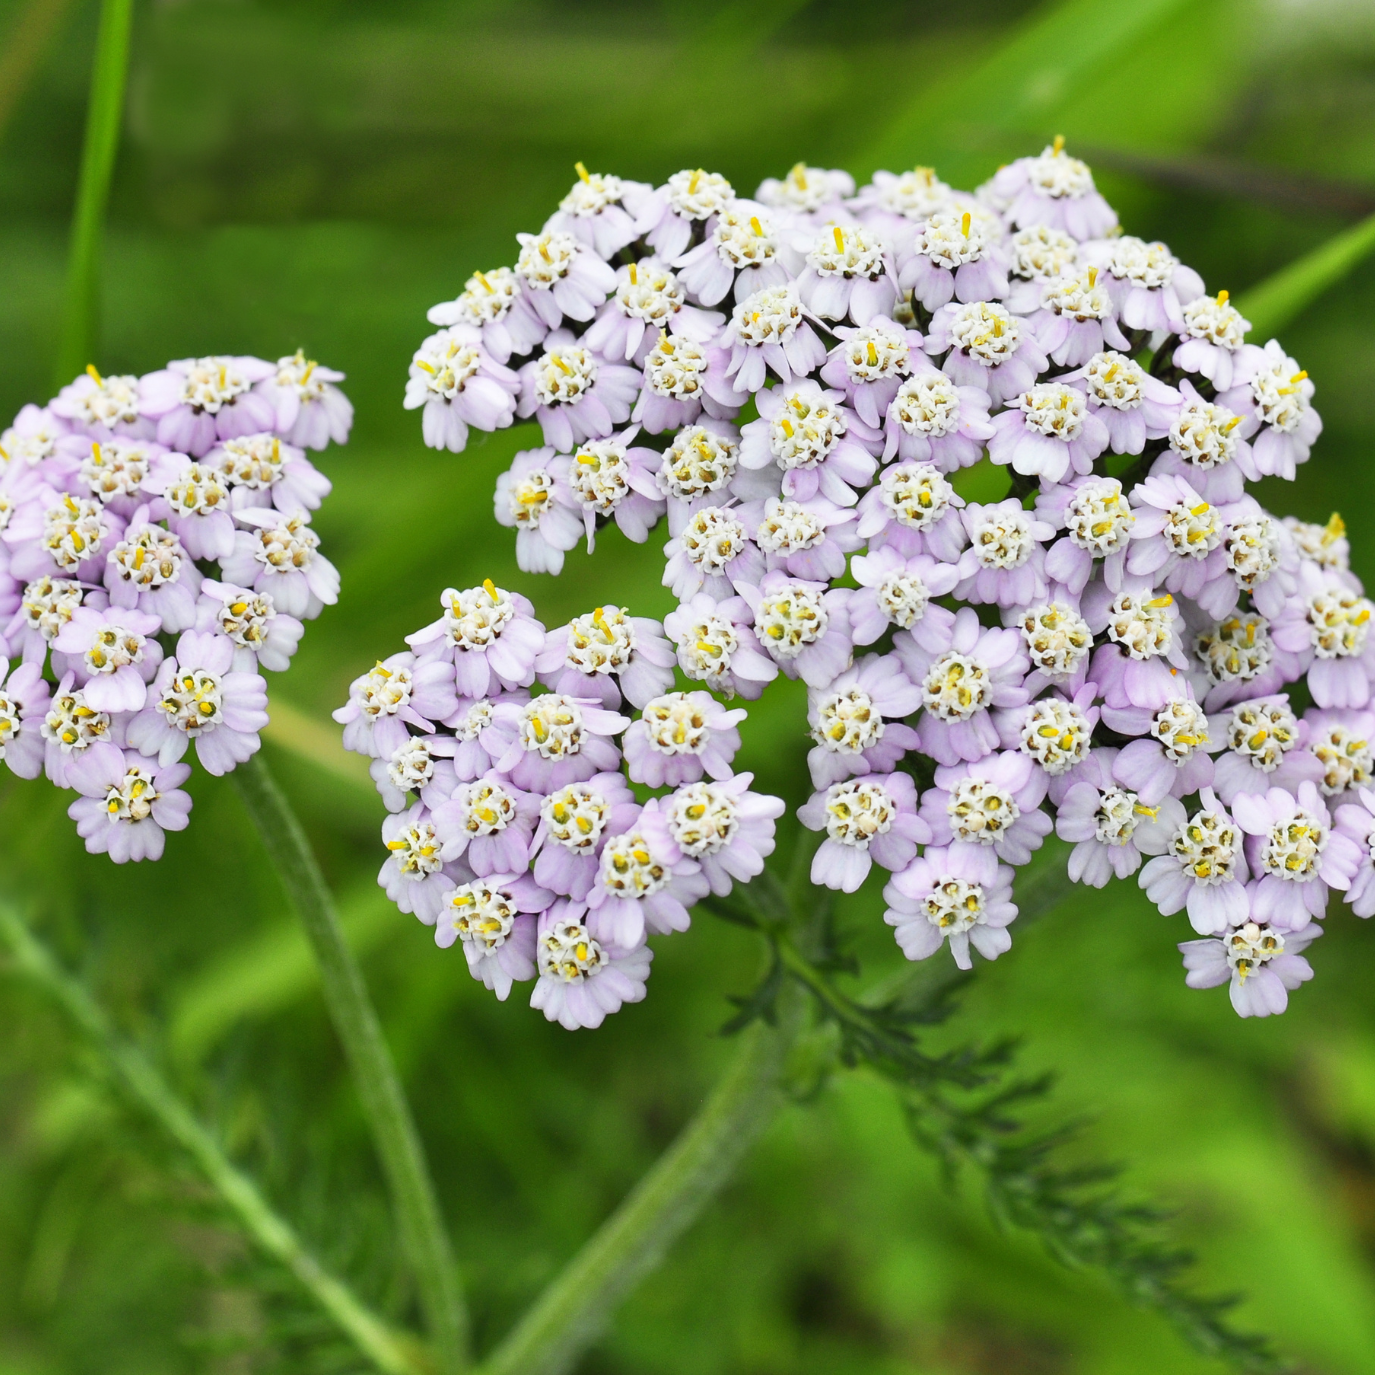 Witchy Pooh's Yarrow Flowers Herb For Topical Wound Healing, Heighten Senses for Ritual and Intuition